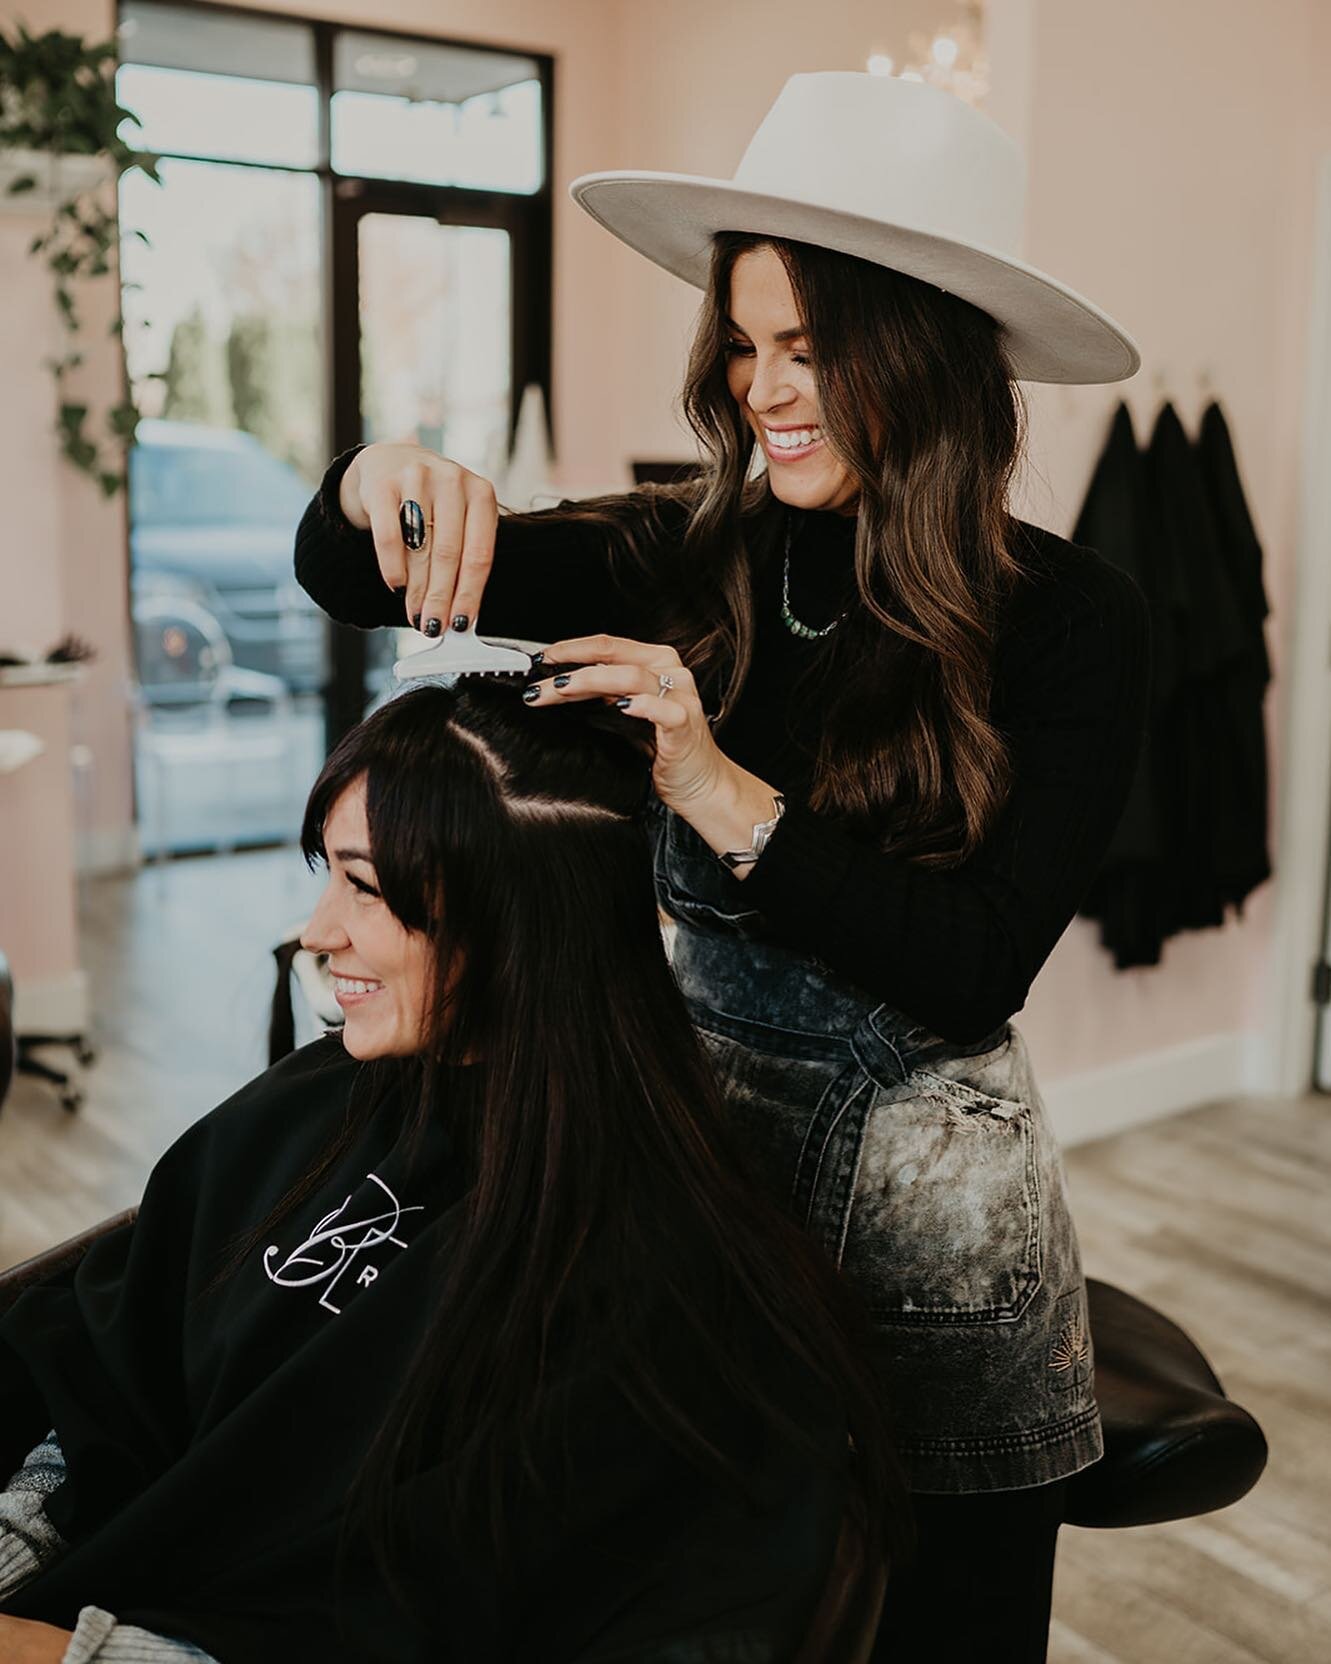 👩&zwj;🦳BRe Seamless Extensions 👩&zwj;🦳

Why our Method? 
✨ Even Distribution of Hair to deliver less tension on the hair 

✨ Custom Color for a Seamless Blend

✨ Achieves the look of Length &amp; Density 

✨ Luxury hair used to maximize lifetime 